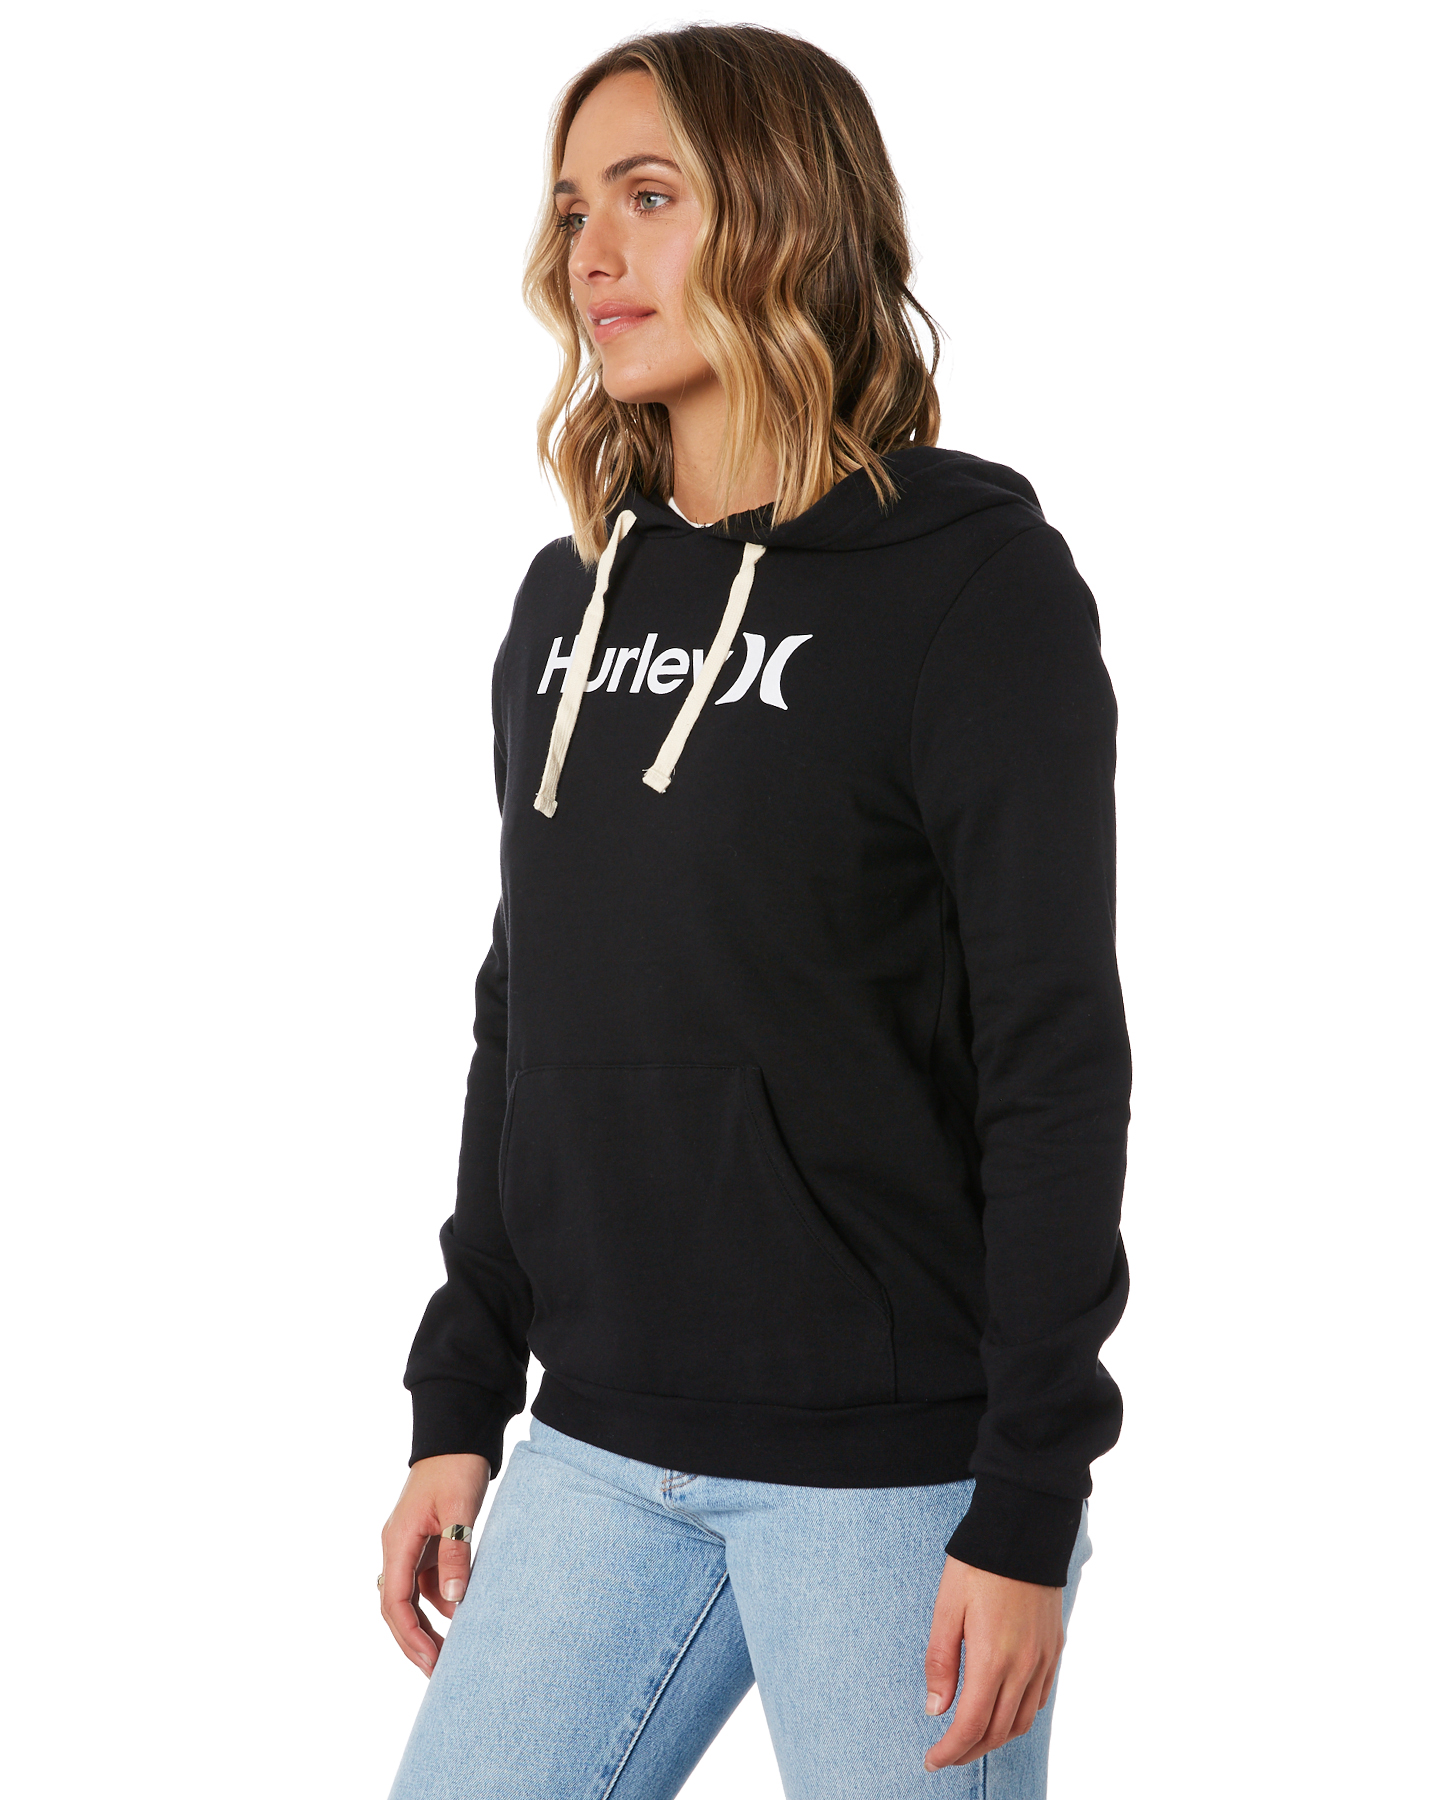 Hurley One And Only Fleece Pull Over - Black | SurfStitch